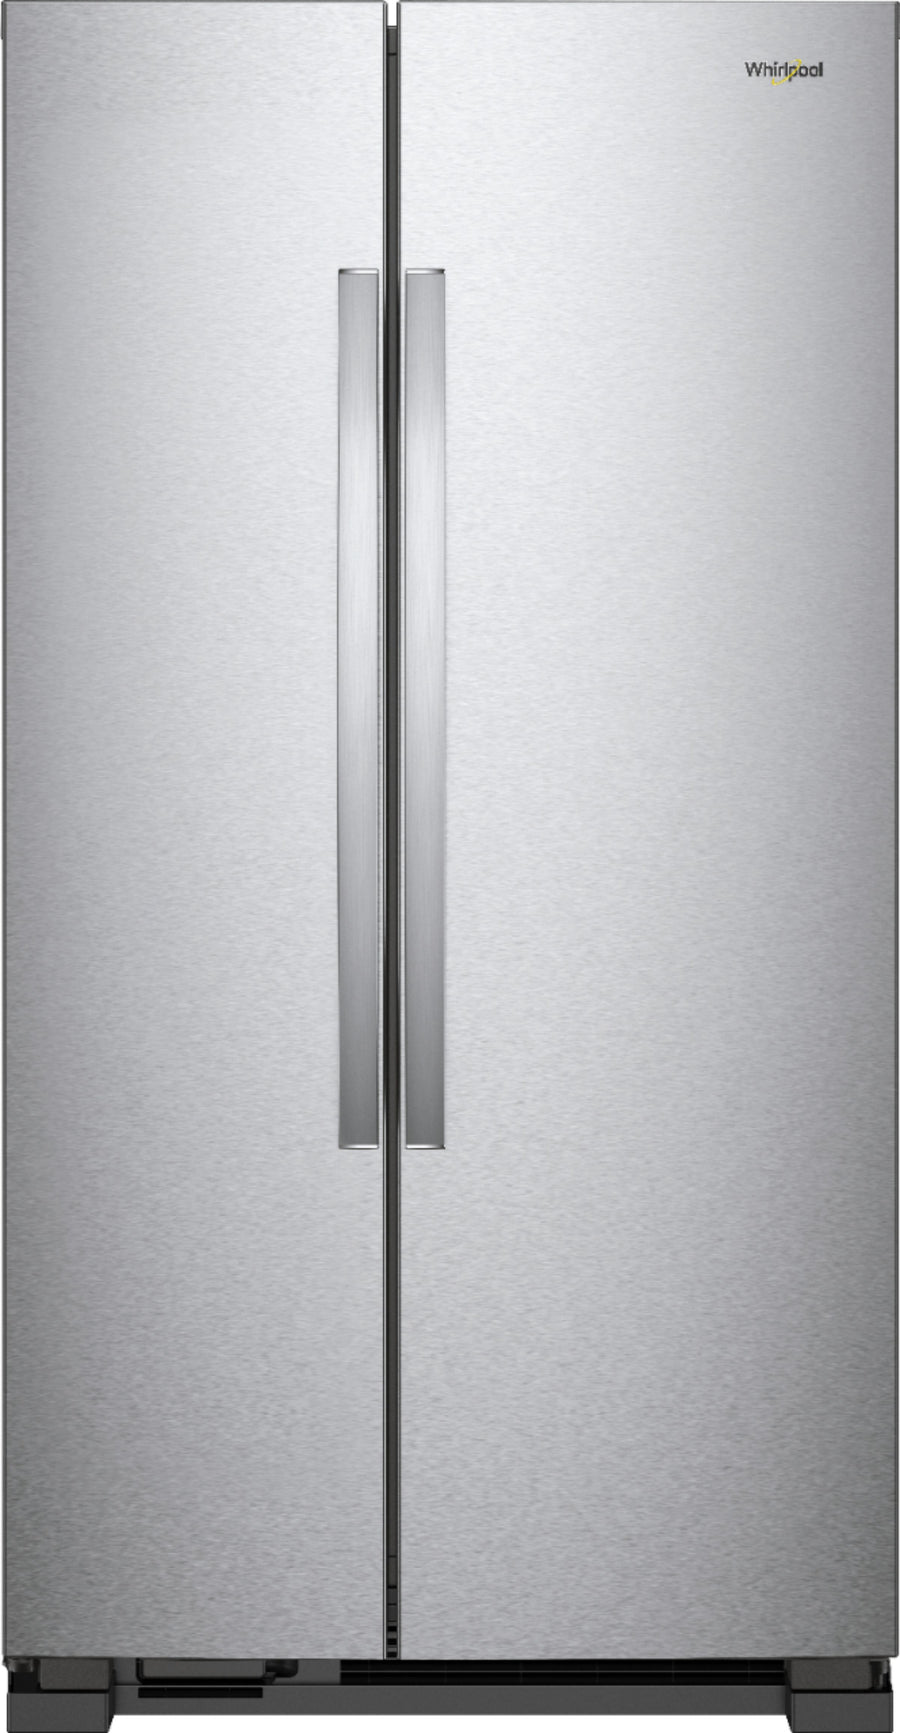 Whirlpool - 21.7 Cu. Ft. Side-by-Side Refrigerator - Monochromatic Stainless Steel_0